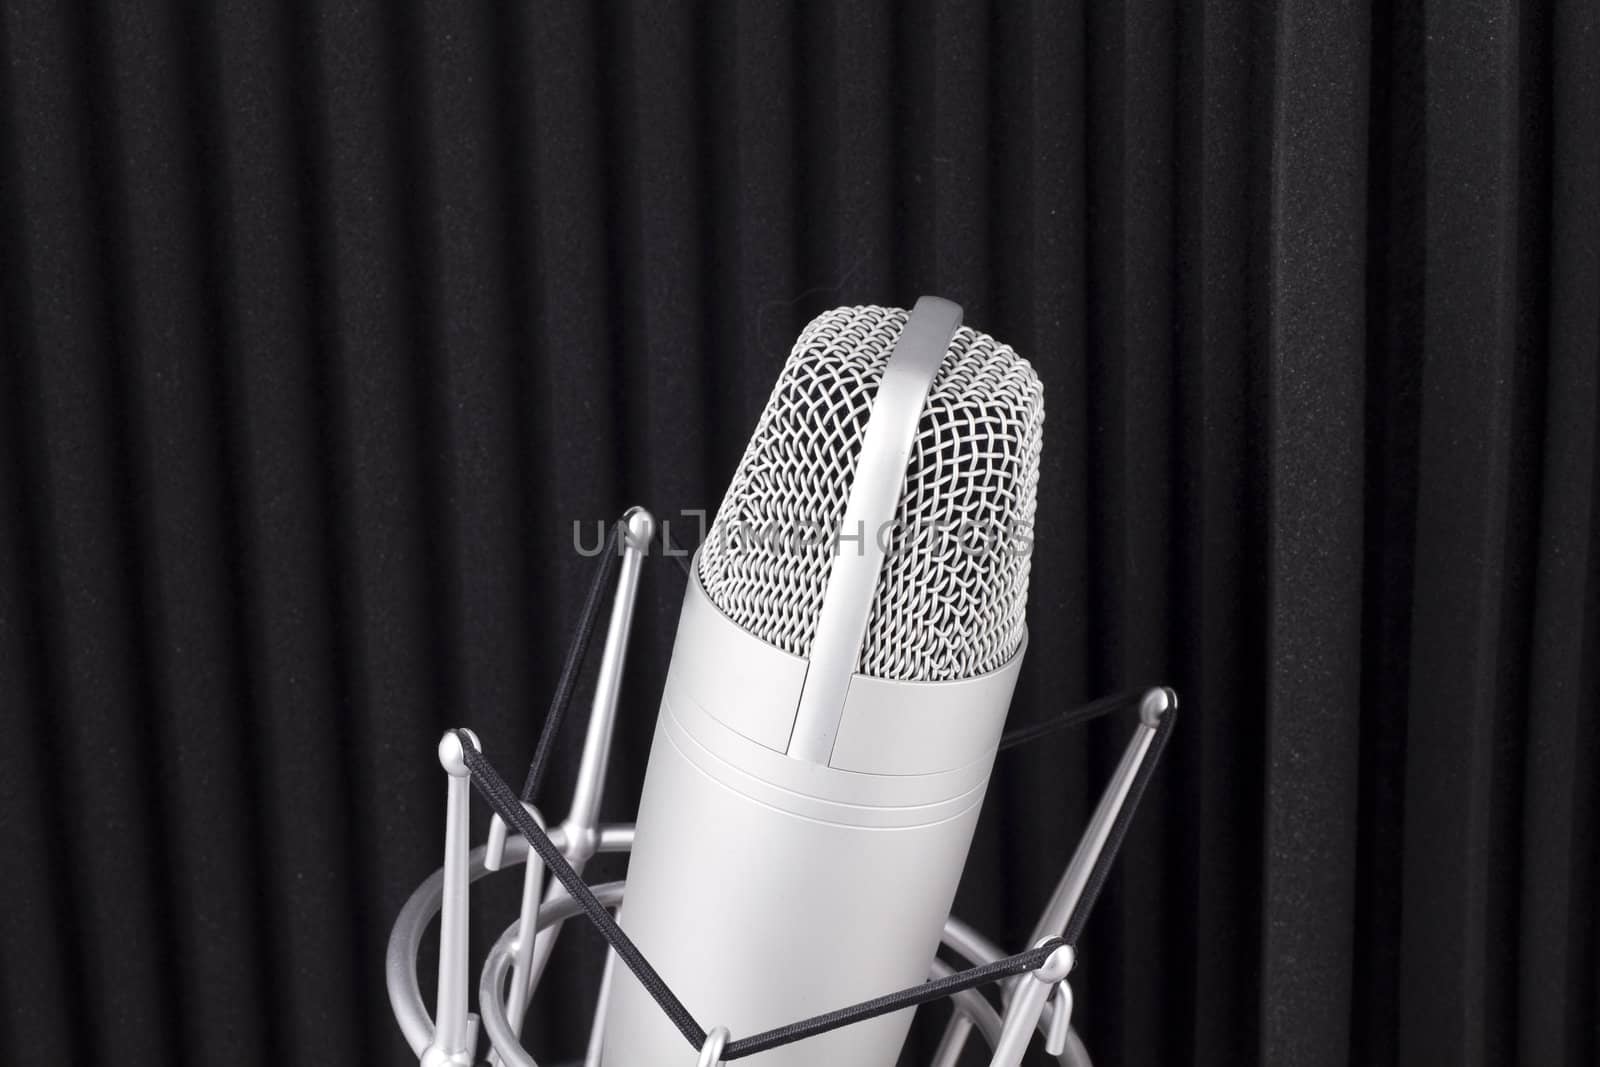 Professional studio microphone on white background by FernandoCortes